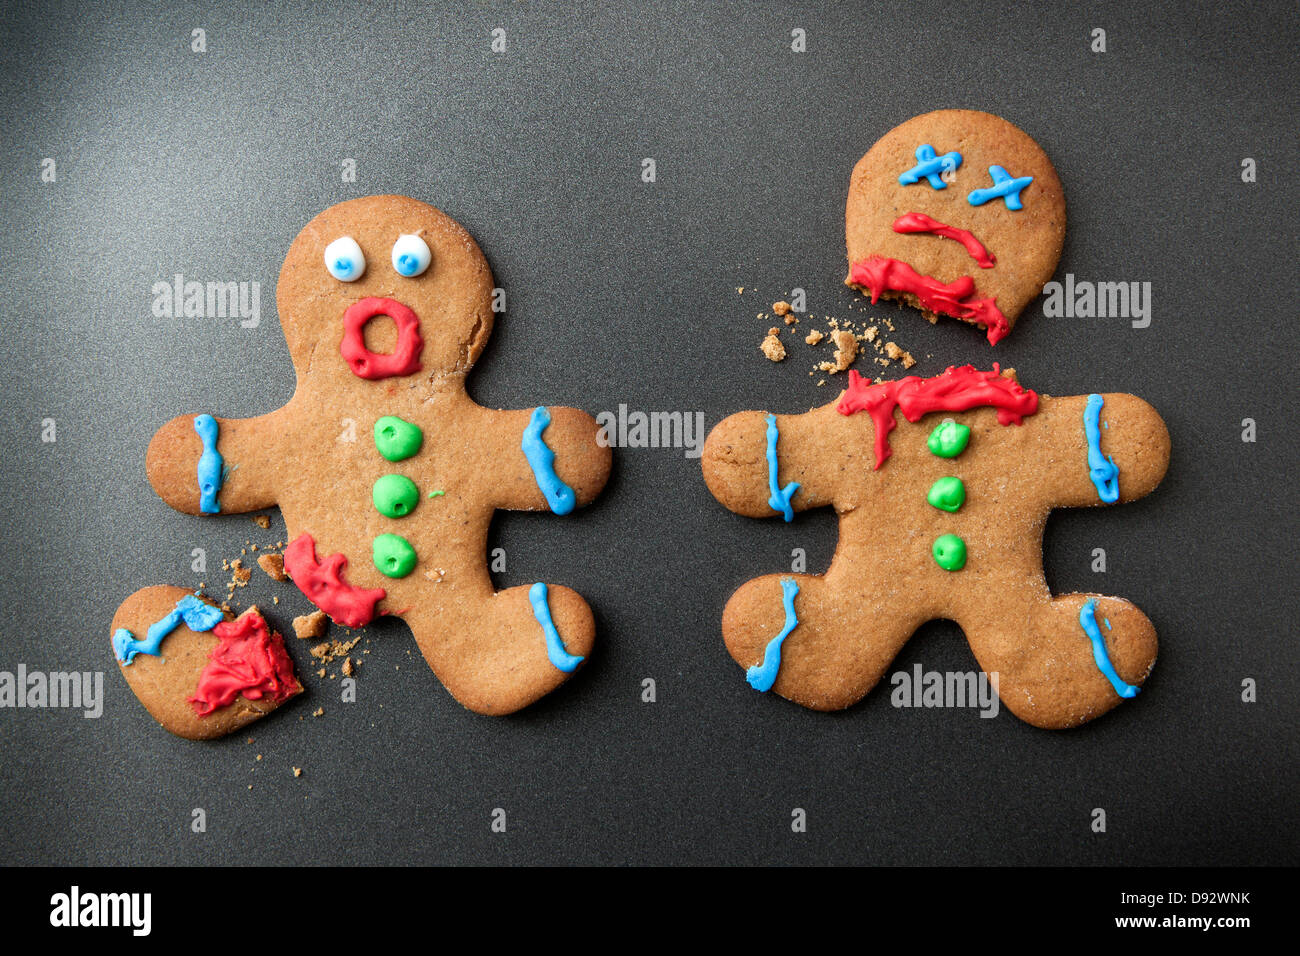 A shocked gingerbread man with broken leg next to a decapitated gingerbread man Stock Photo